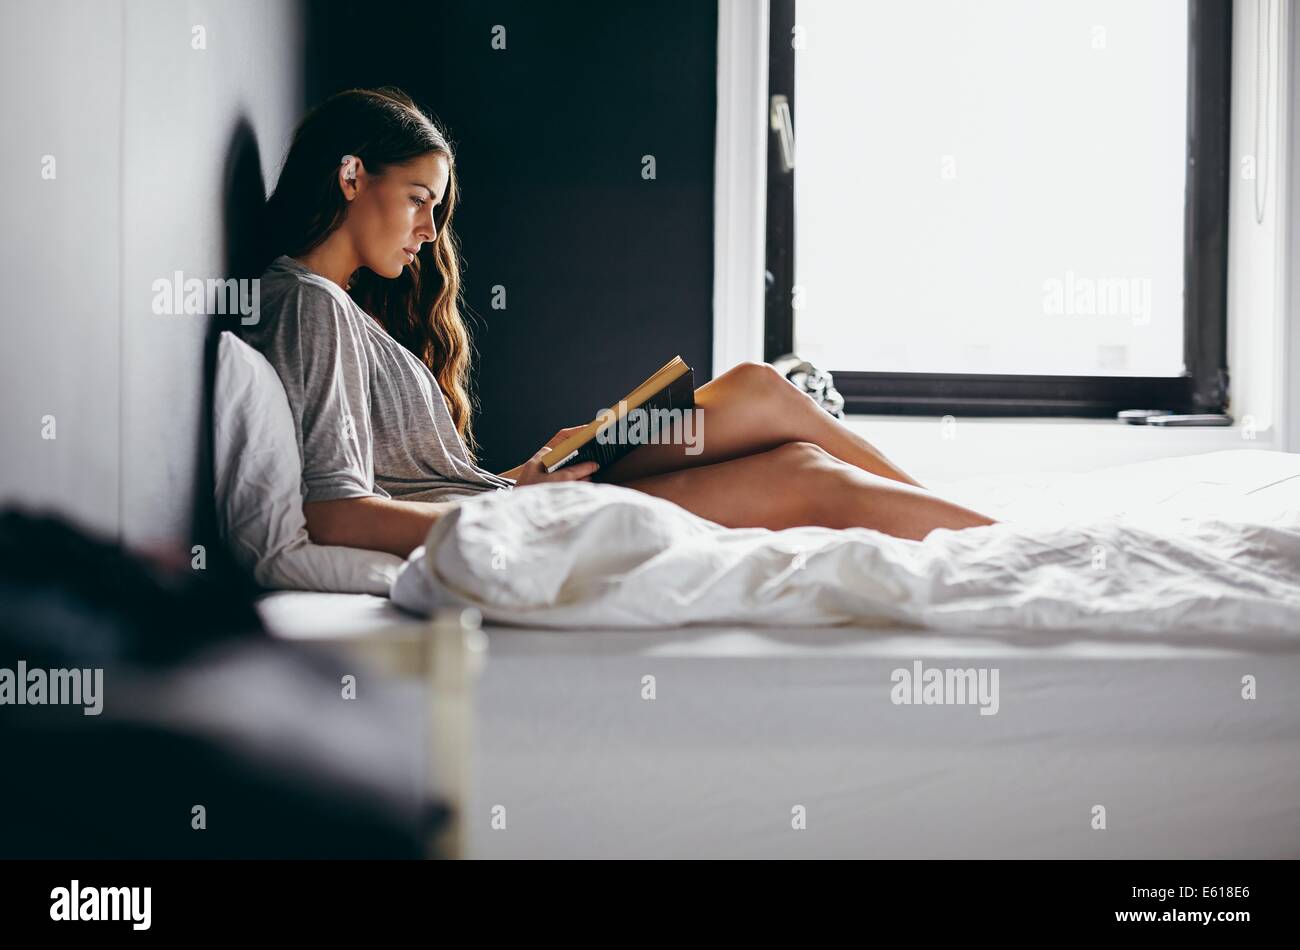 Side view shot of an attractive young woman sitting on her bed reading an interesting novel. Caucasian female model in bedroom. Stock Photo